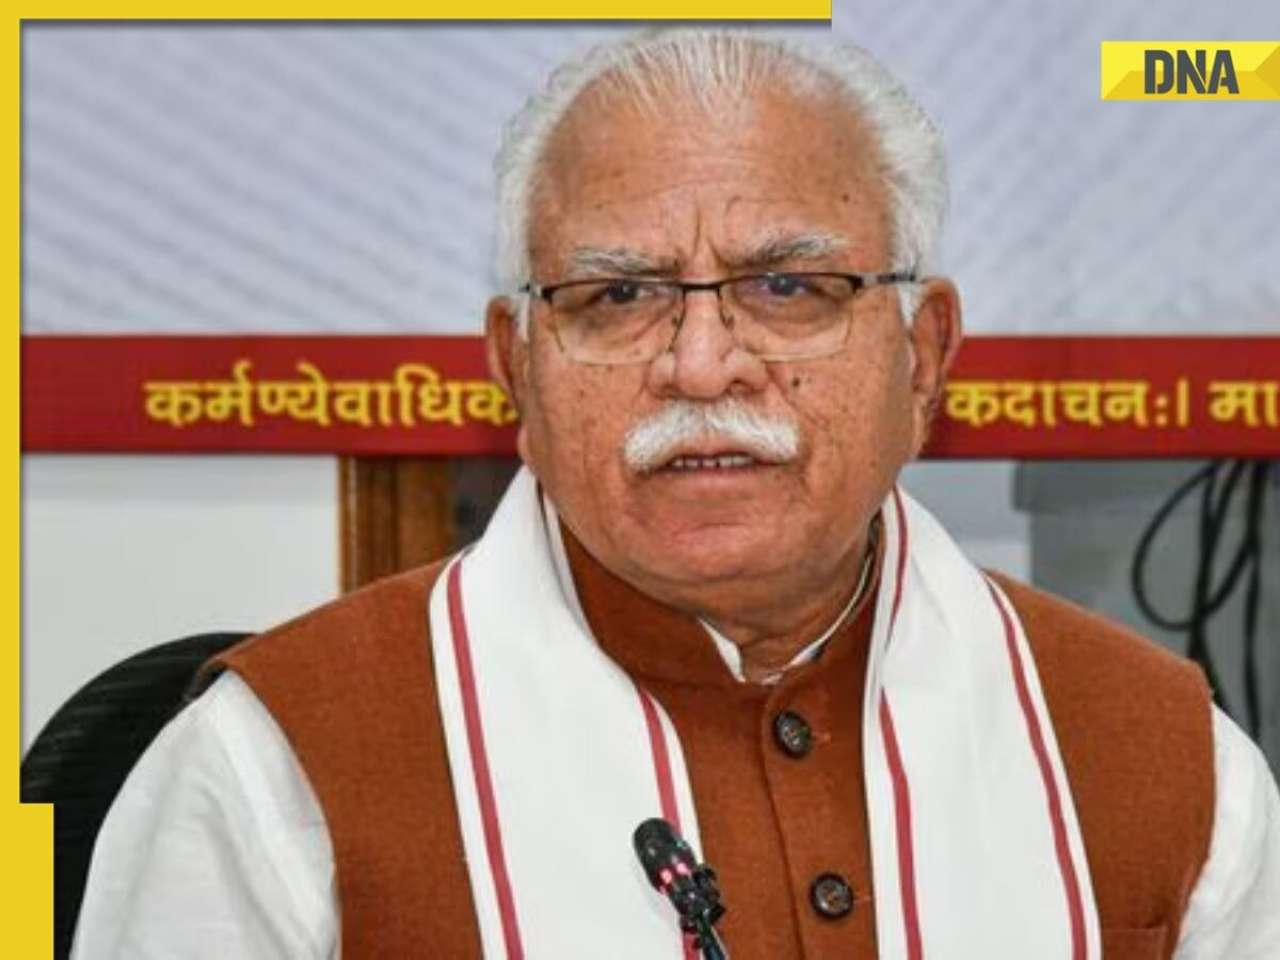 Haryana CM Manohar Lal Khattar likely to resign today after BJP, JJP head for a split